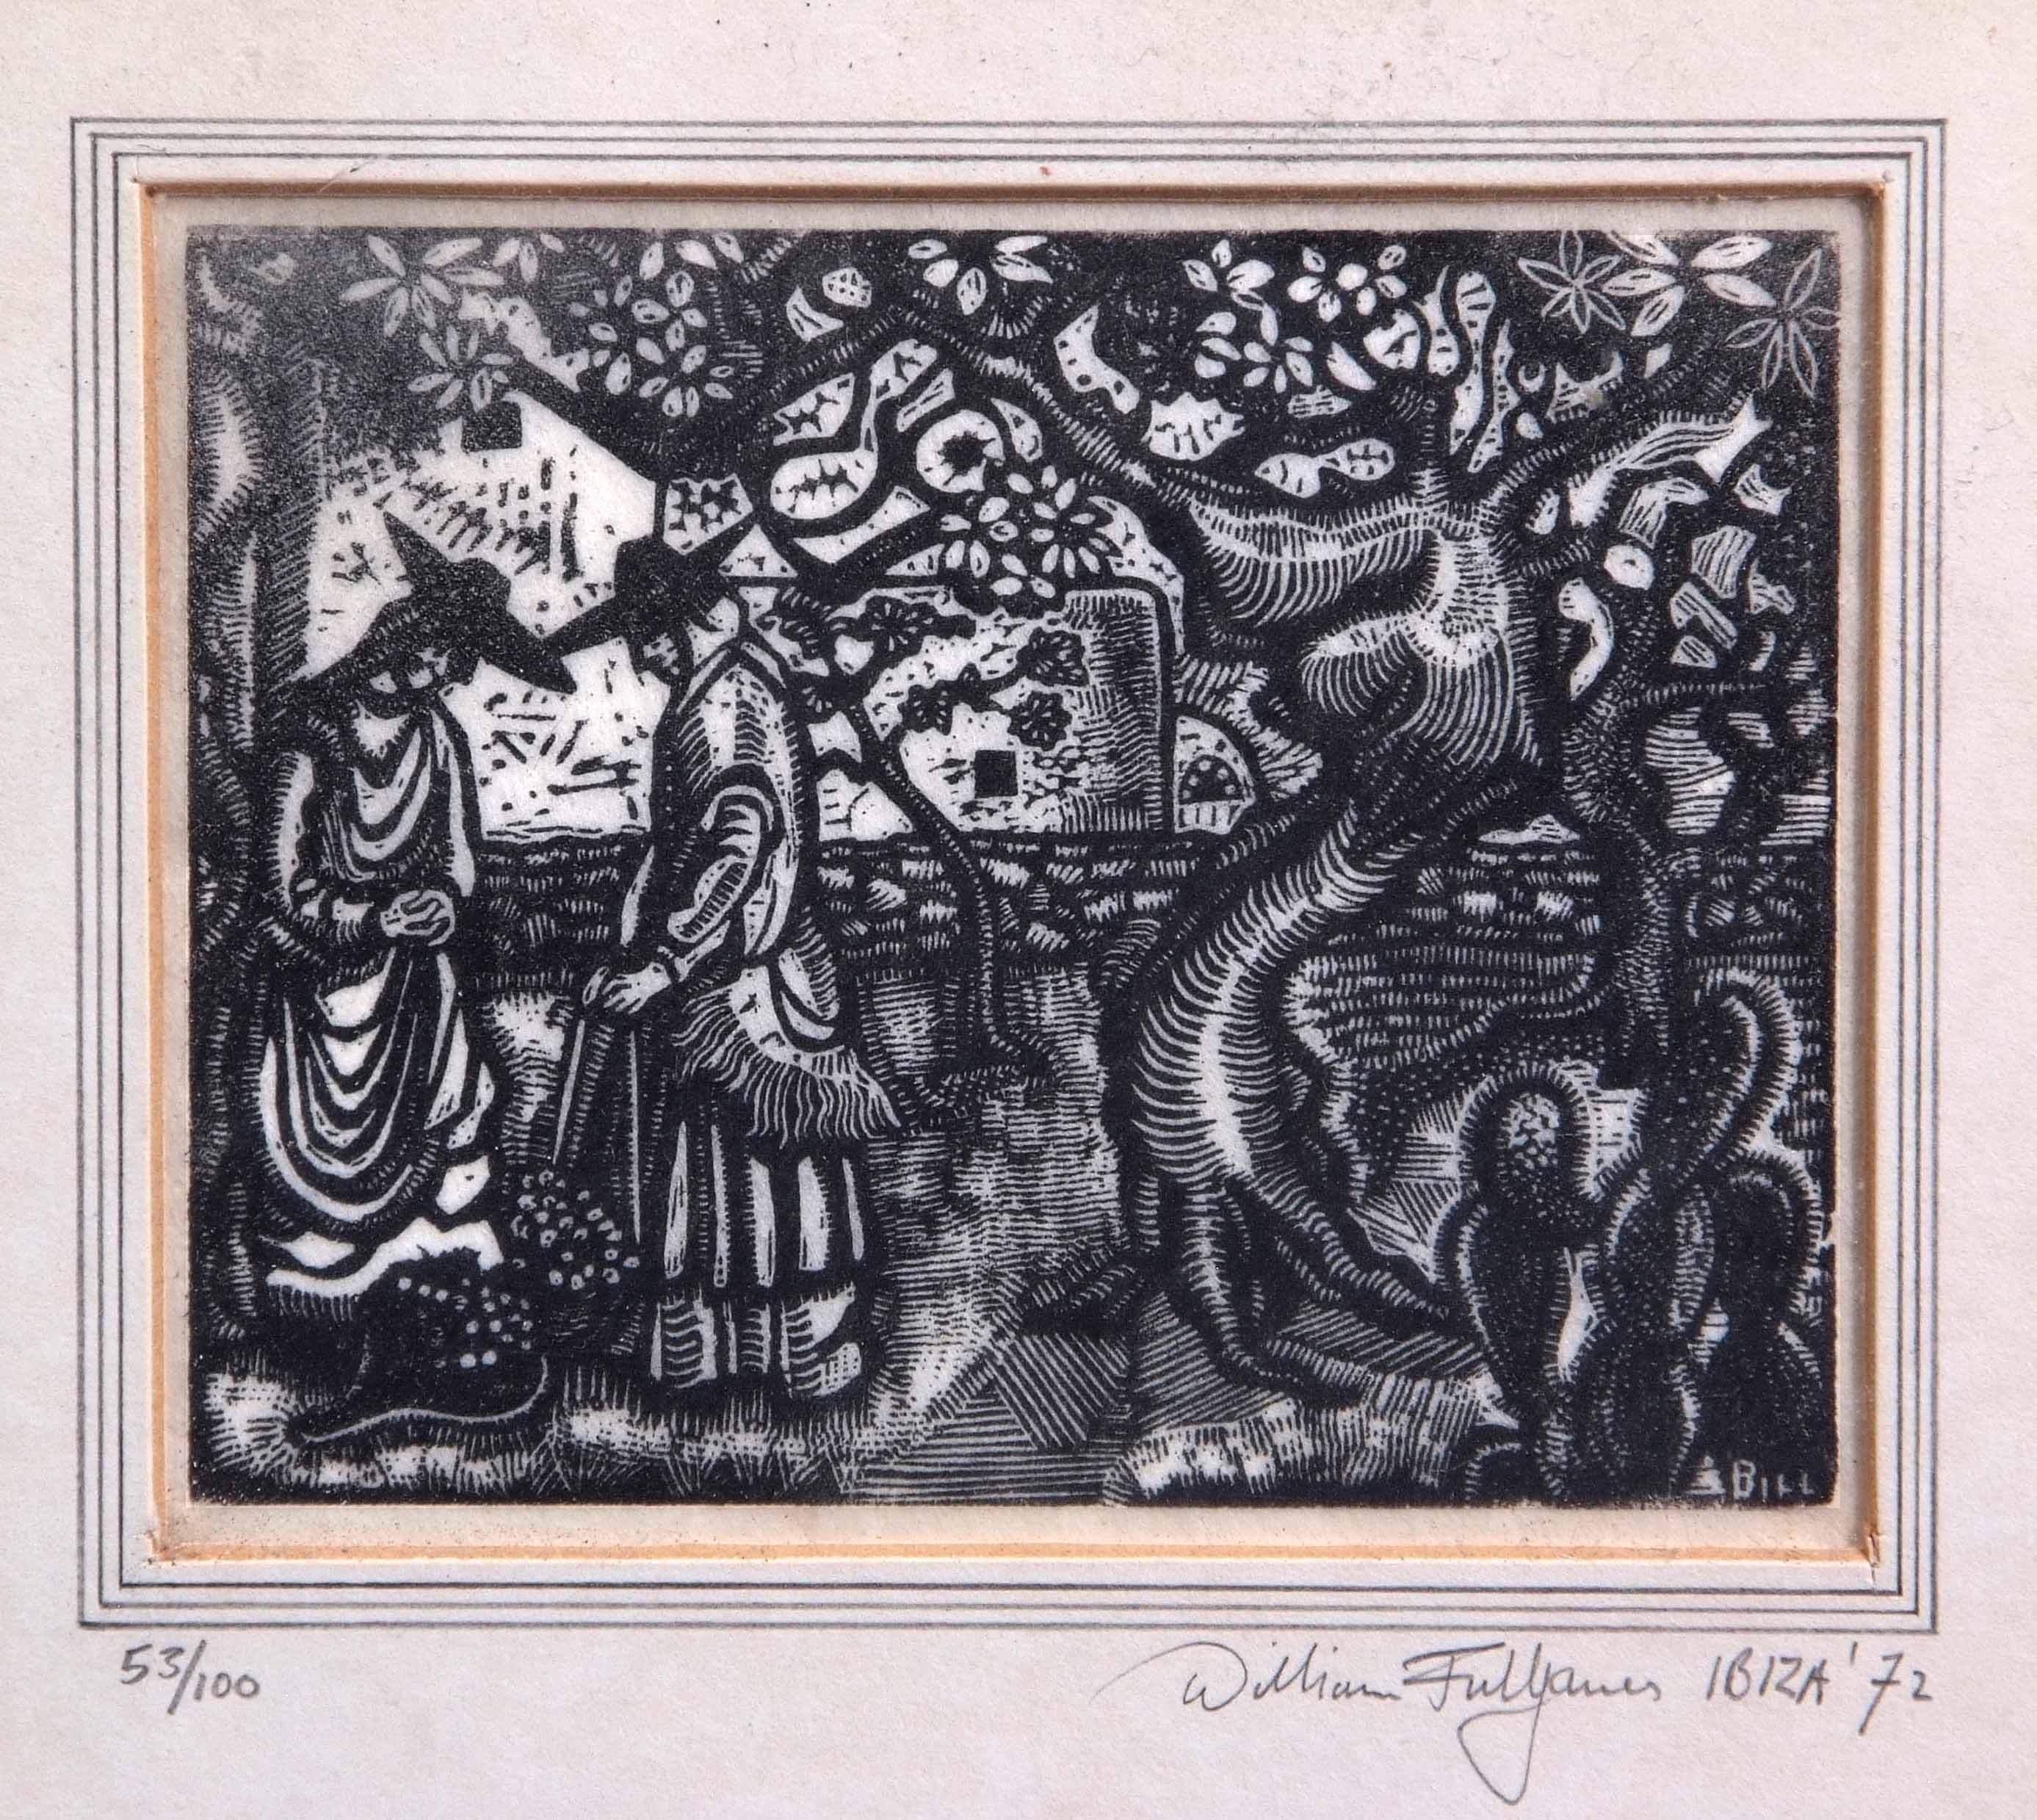 William Fulljames (Born 1939) Landscape with figures, wood engraving, signed, dated '72, numbered - Image 2 of 2